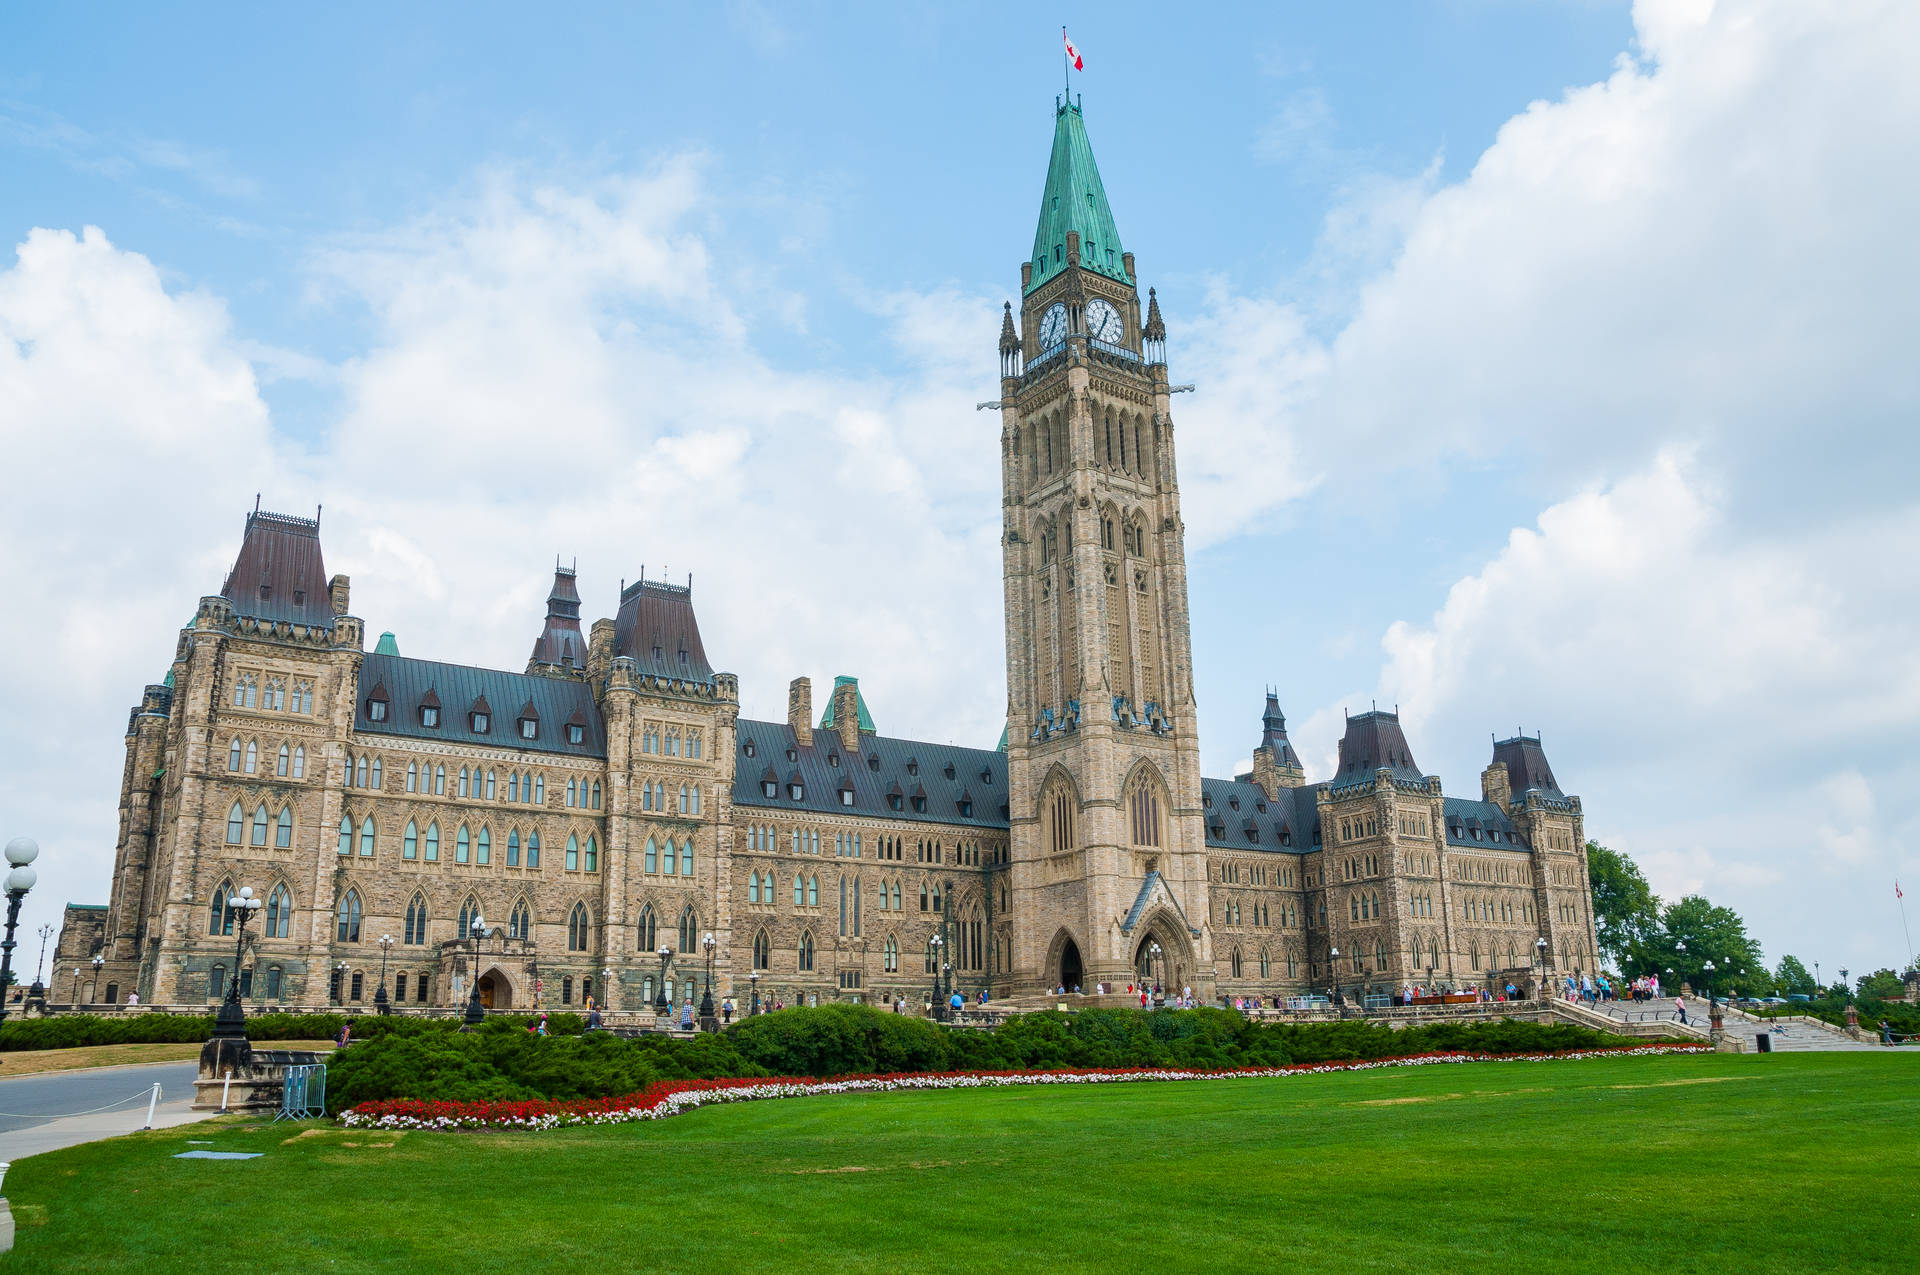 Caption: Canada's Iconic Peace Tower Against Blue Sky